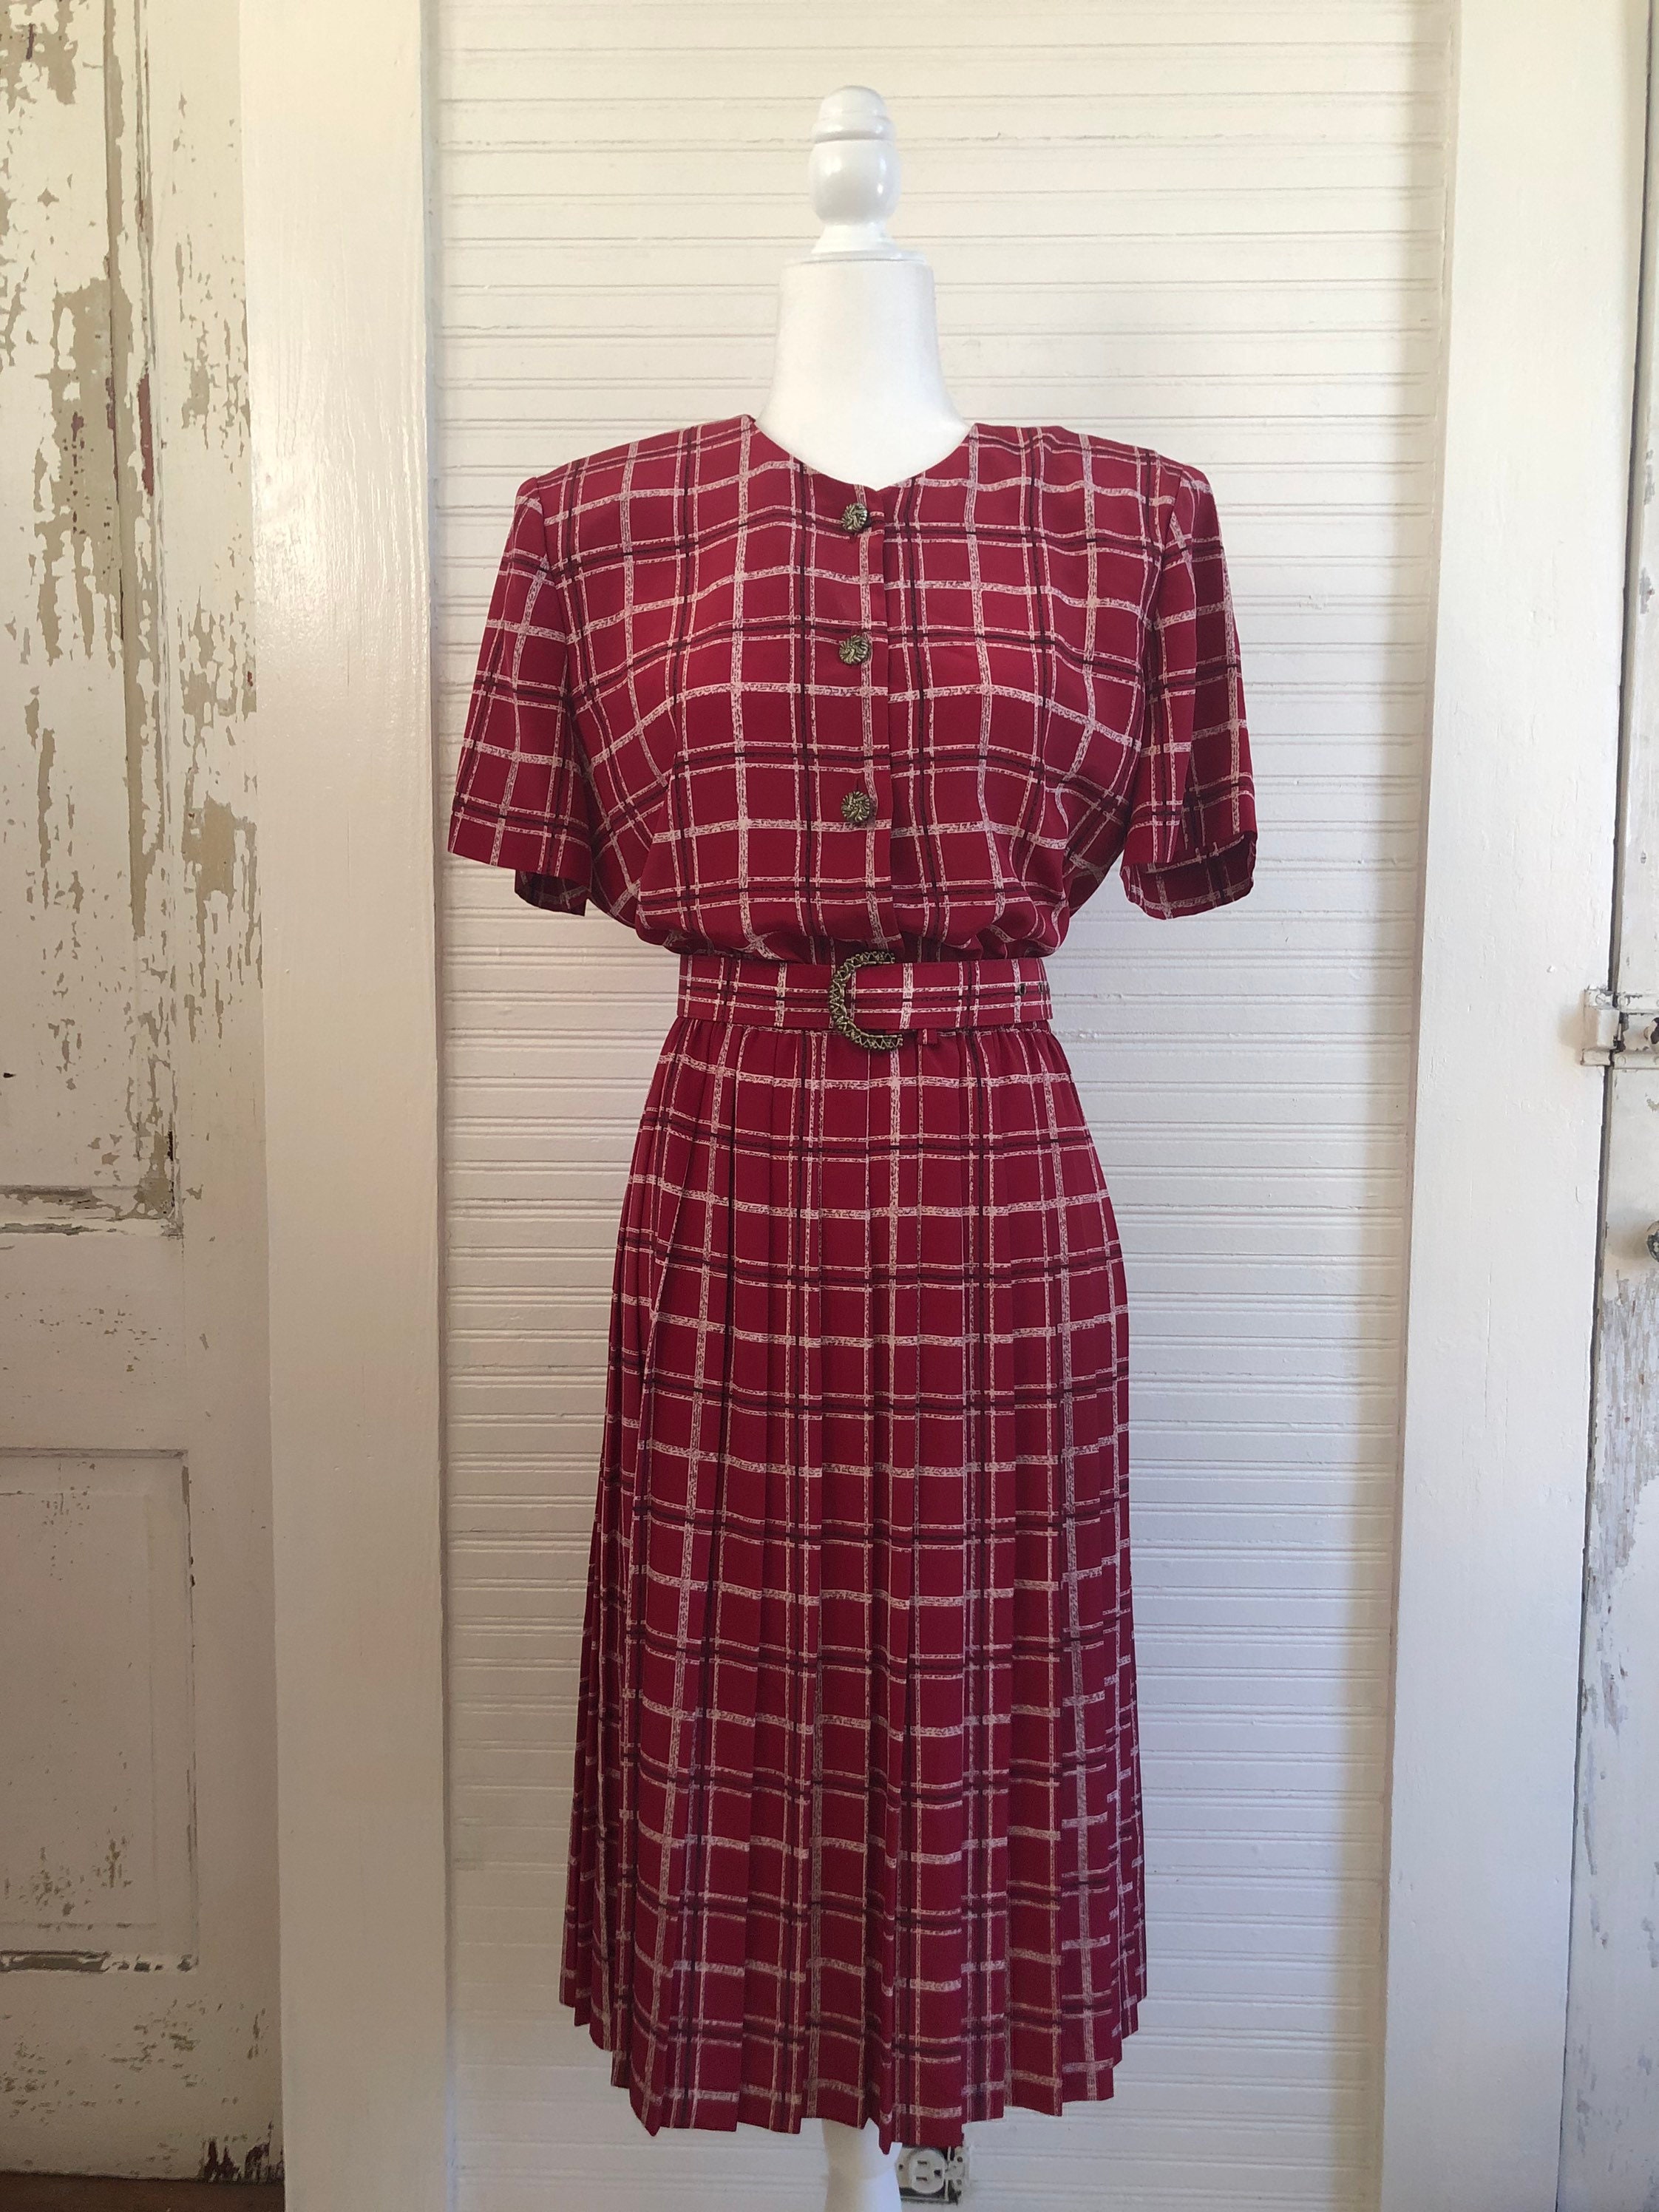 Vintage 1980's Red Checkered Pleated A-Line Leslie Fay | Etsy